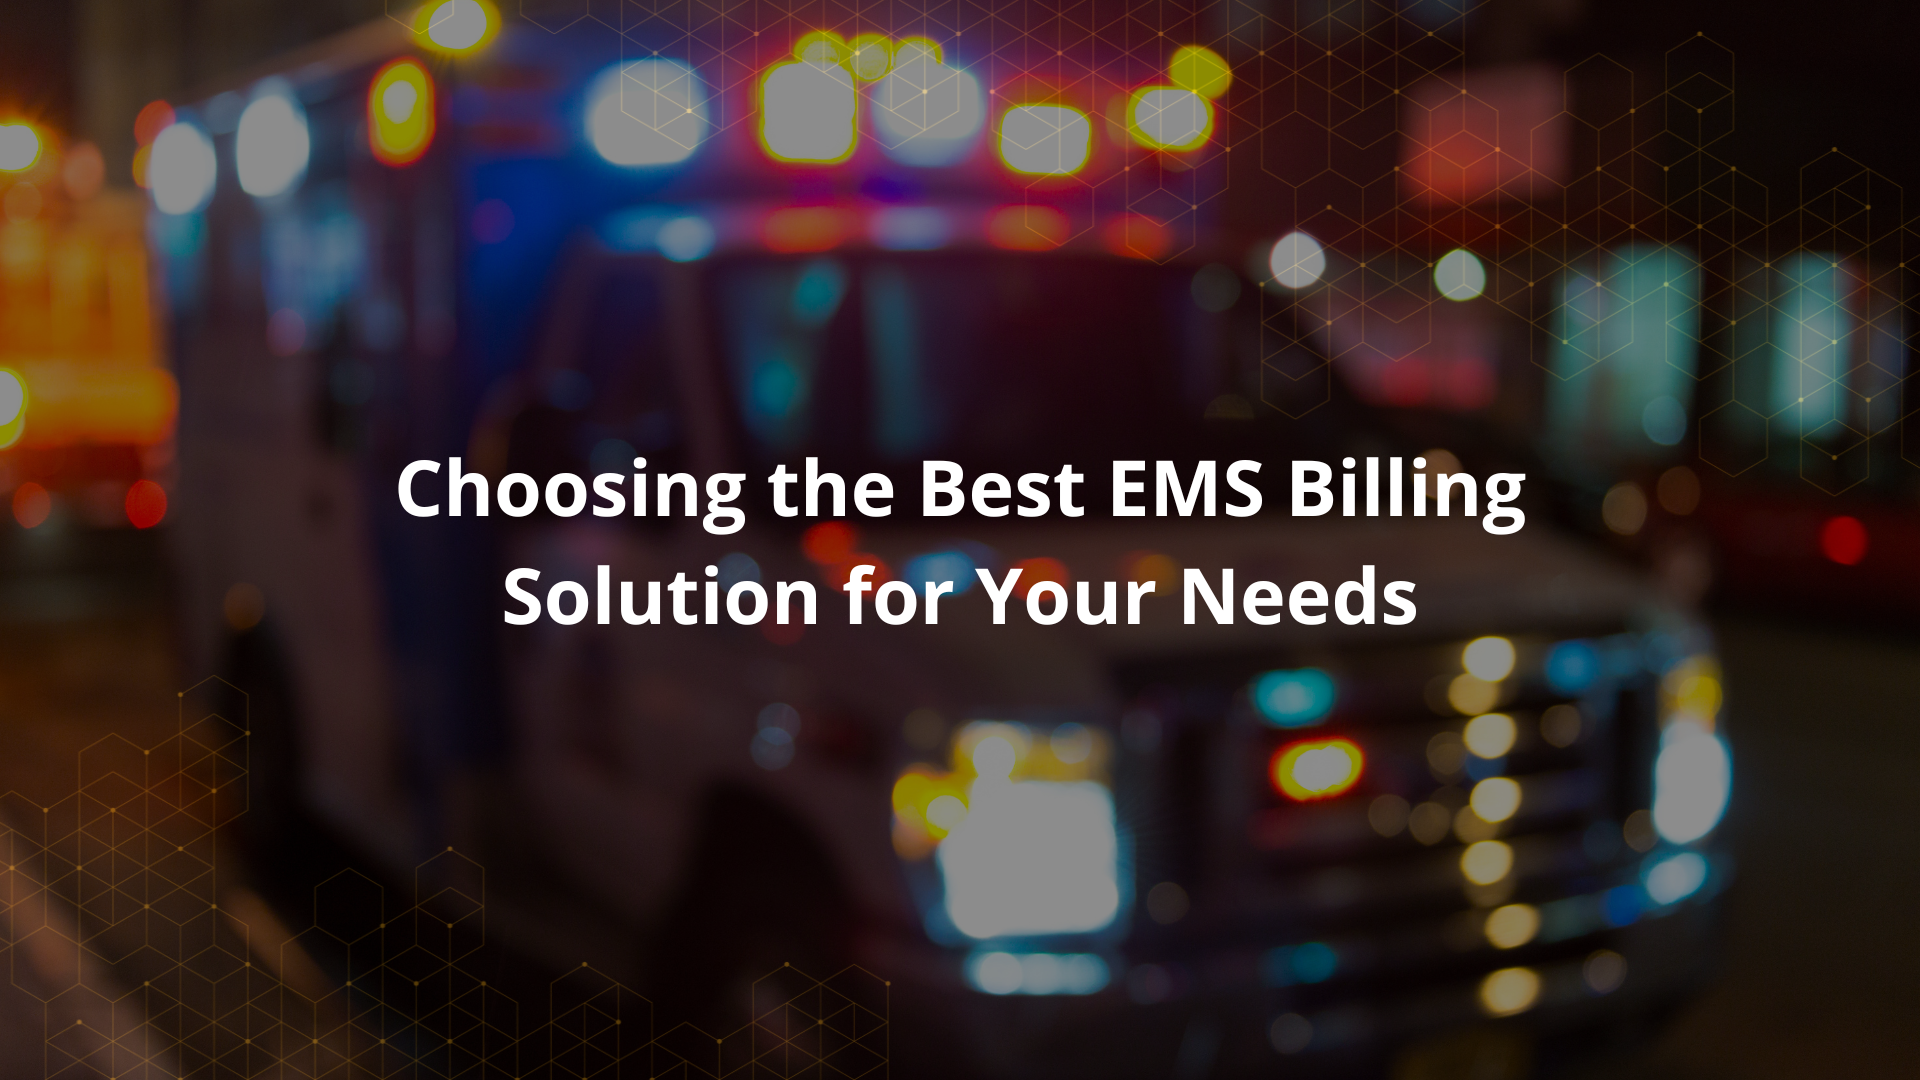 Choosing the Best EMS Billing Solution for Your Needs